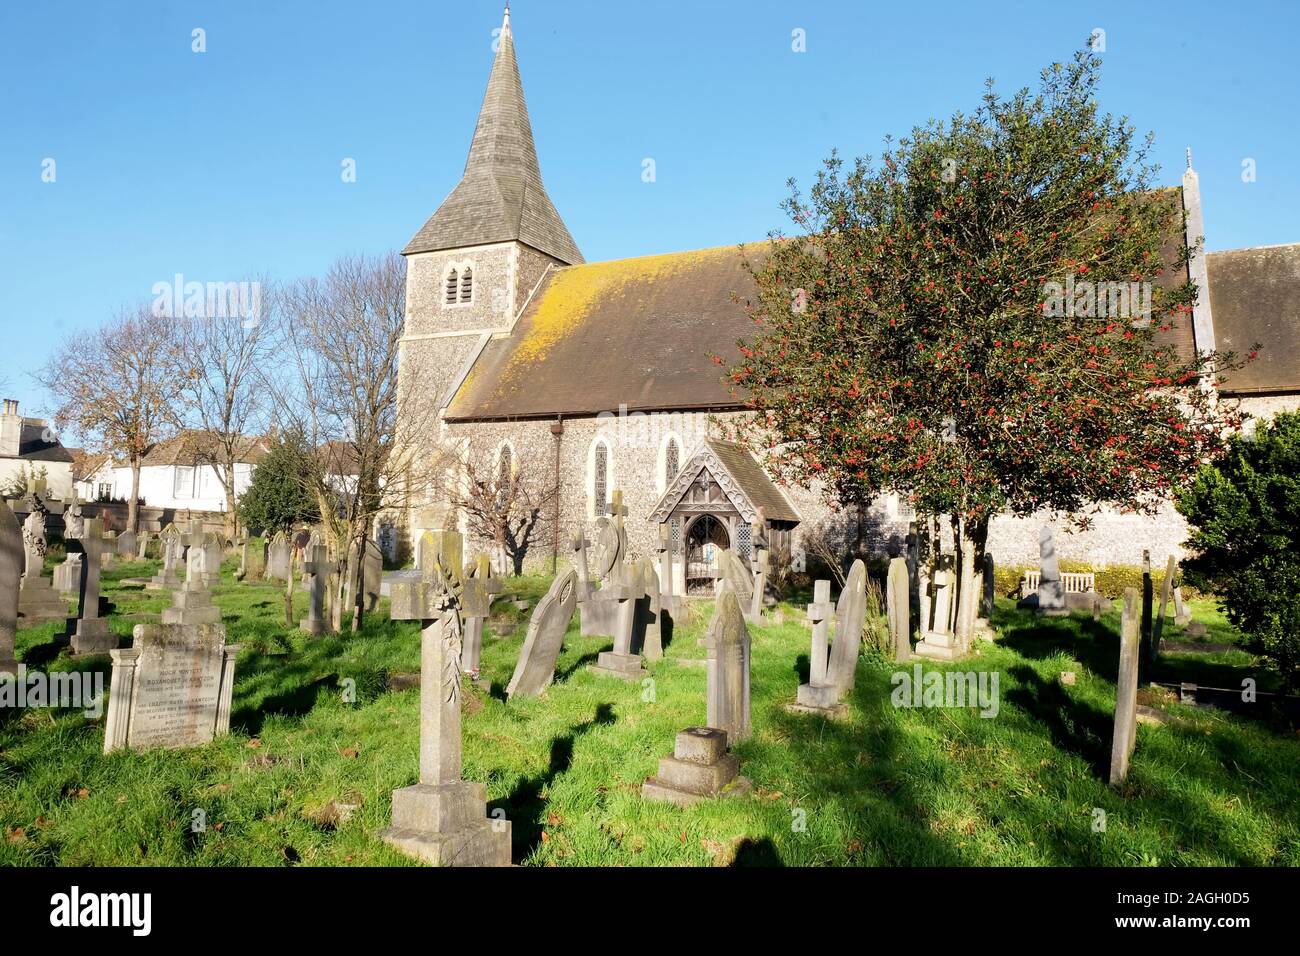 A beautiful old church and grave yard with a holly tree full of red berries in Hove, Brighton, East Sussex, united kingdom, the grave tombs are in the Stock Photo